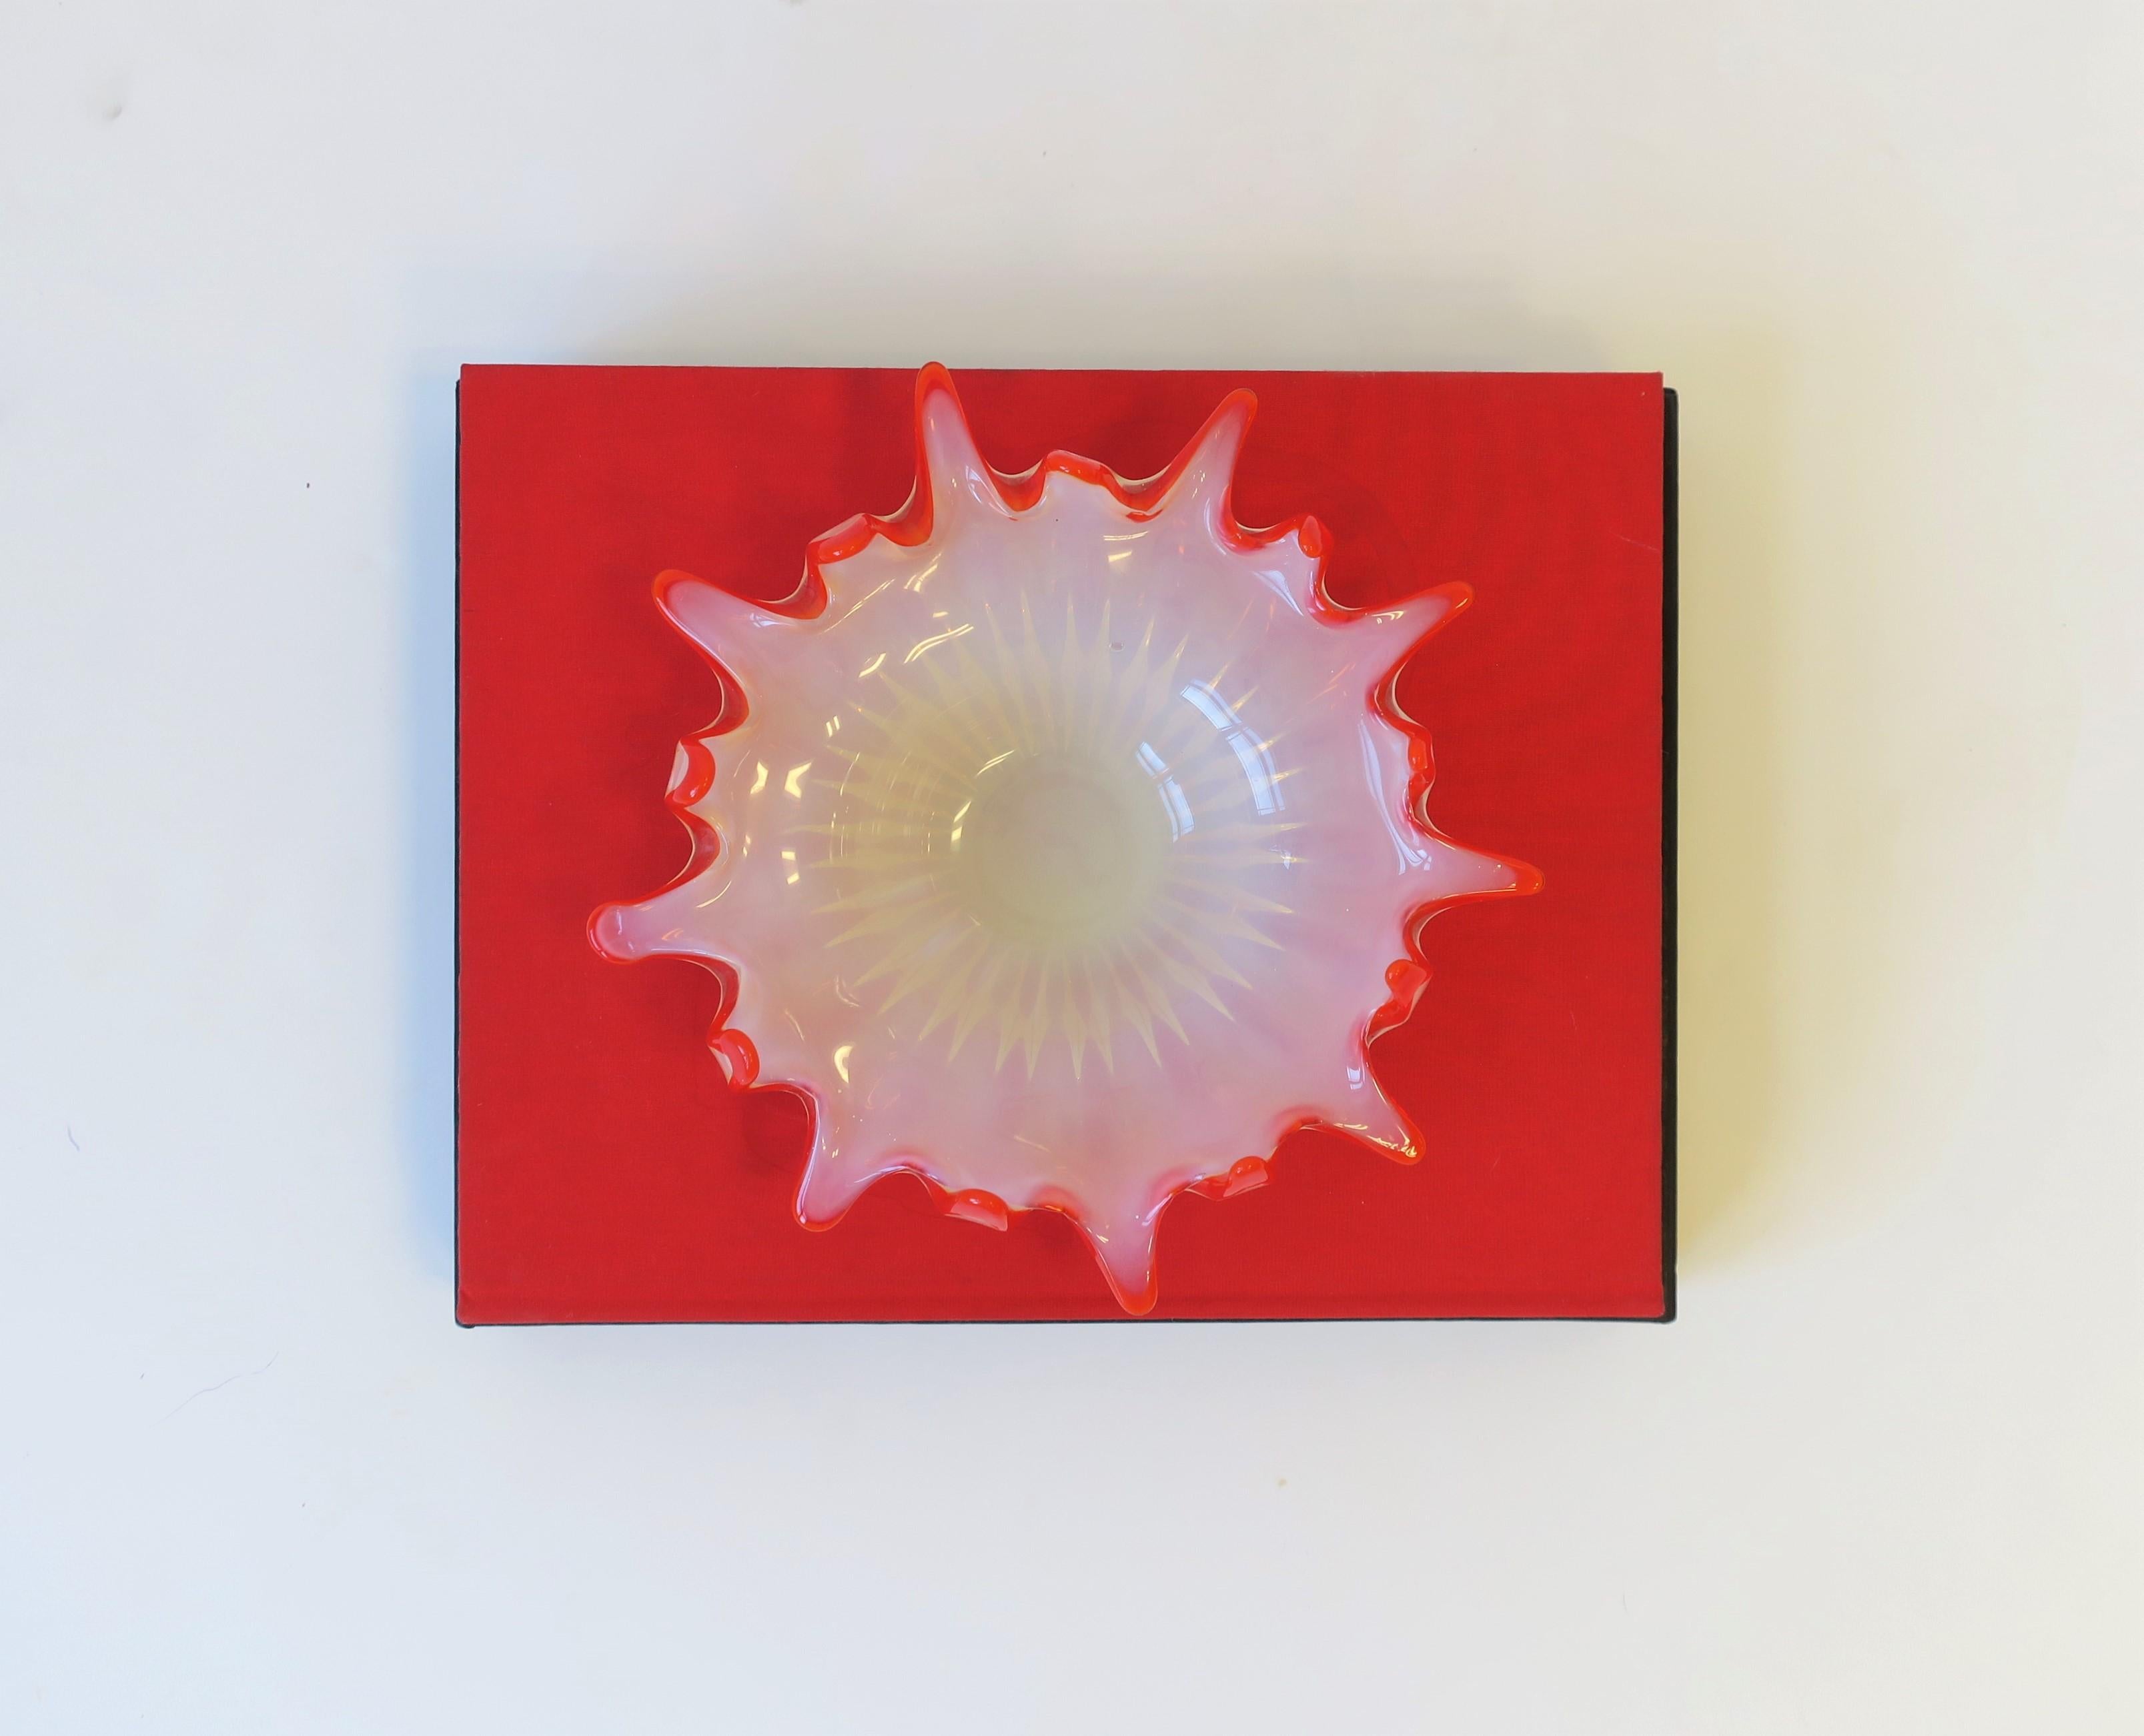 A Midcentury Modern art glass bowl in red and white opaline, circa mid-20th century. White opaline art glass bowl has a fluted base and red trim/edge design. Bowl is a nice size measuring: 10.5